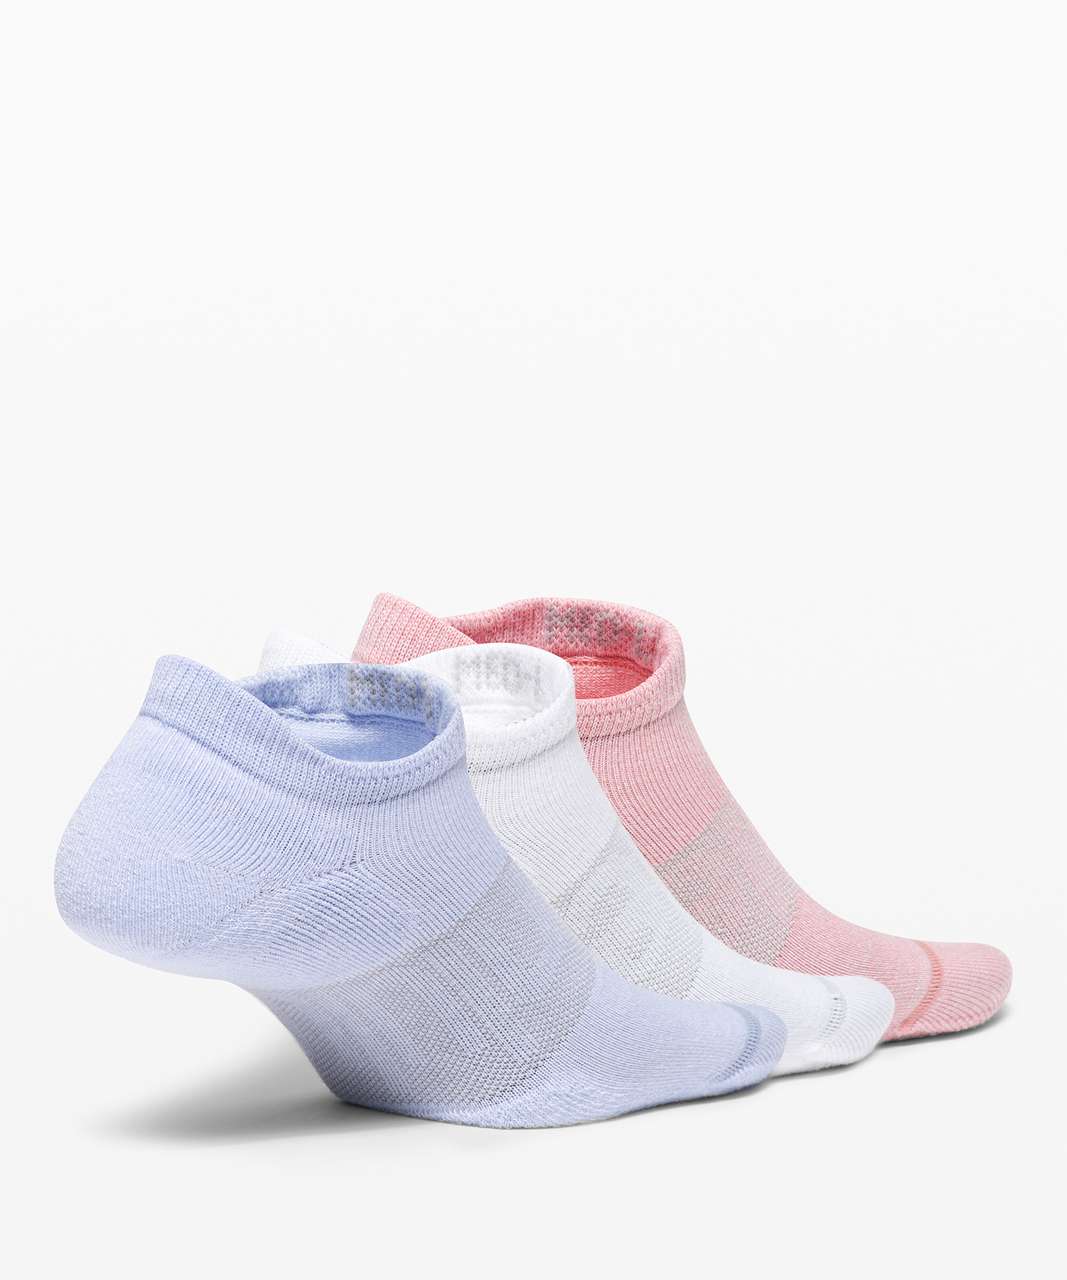 Lululemon Daily Stride Low Ankle Sock *3 Pack - White / Pink Puff / Blue Linen